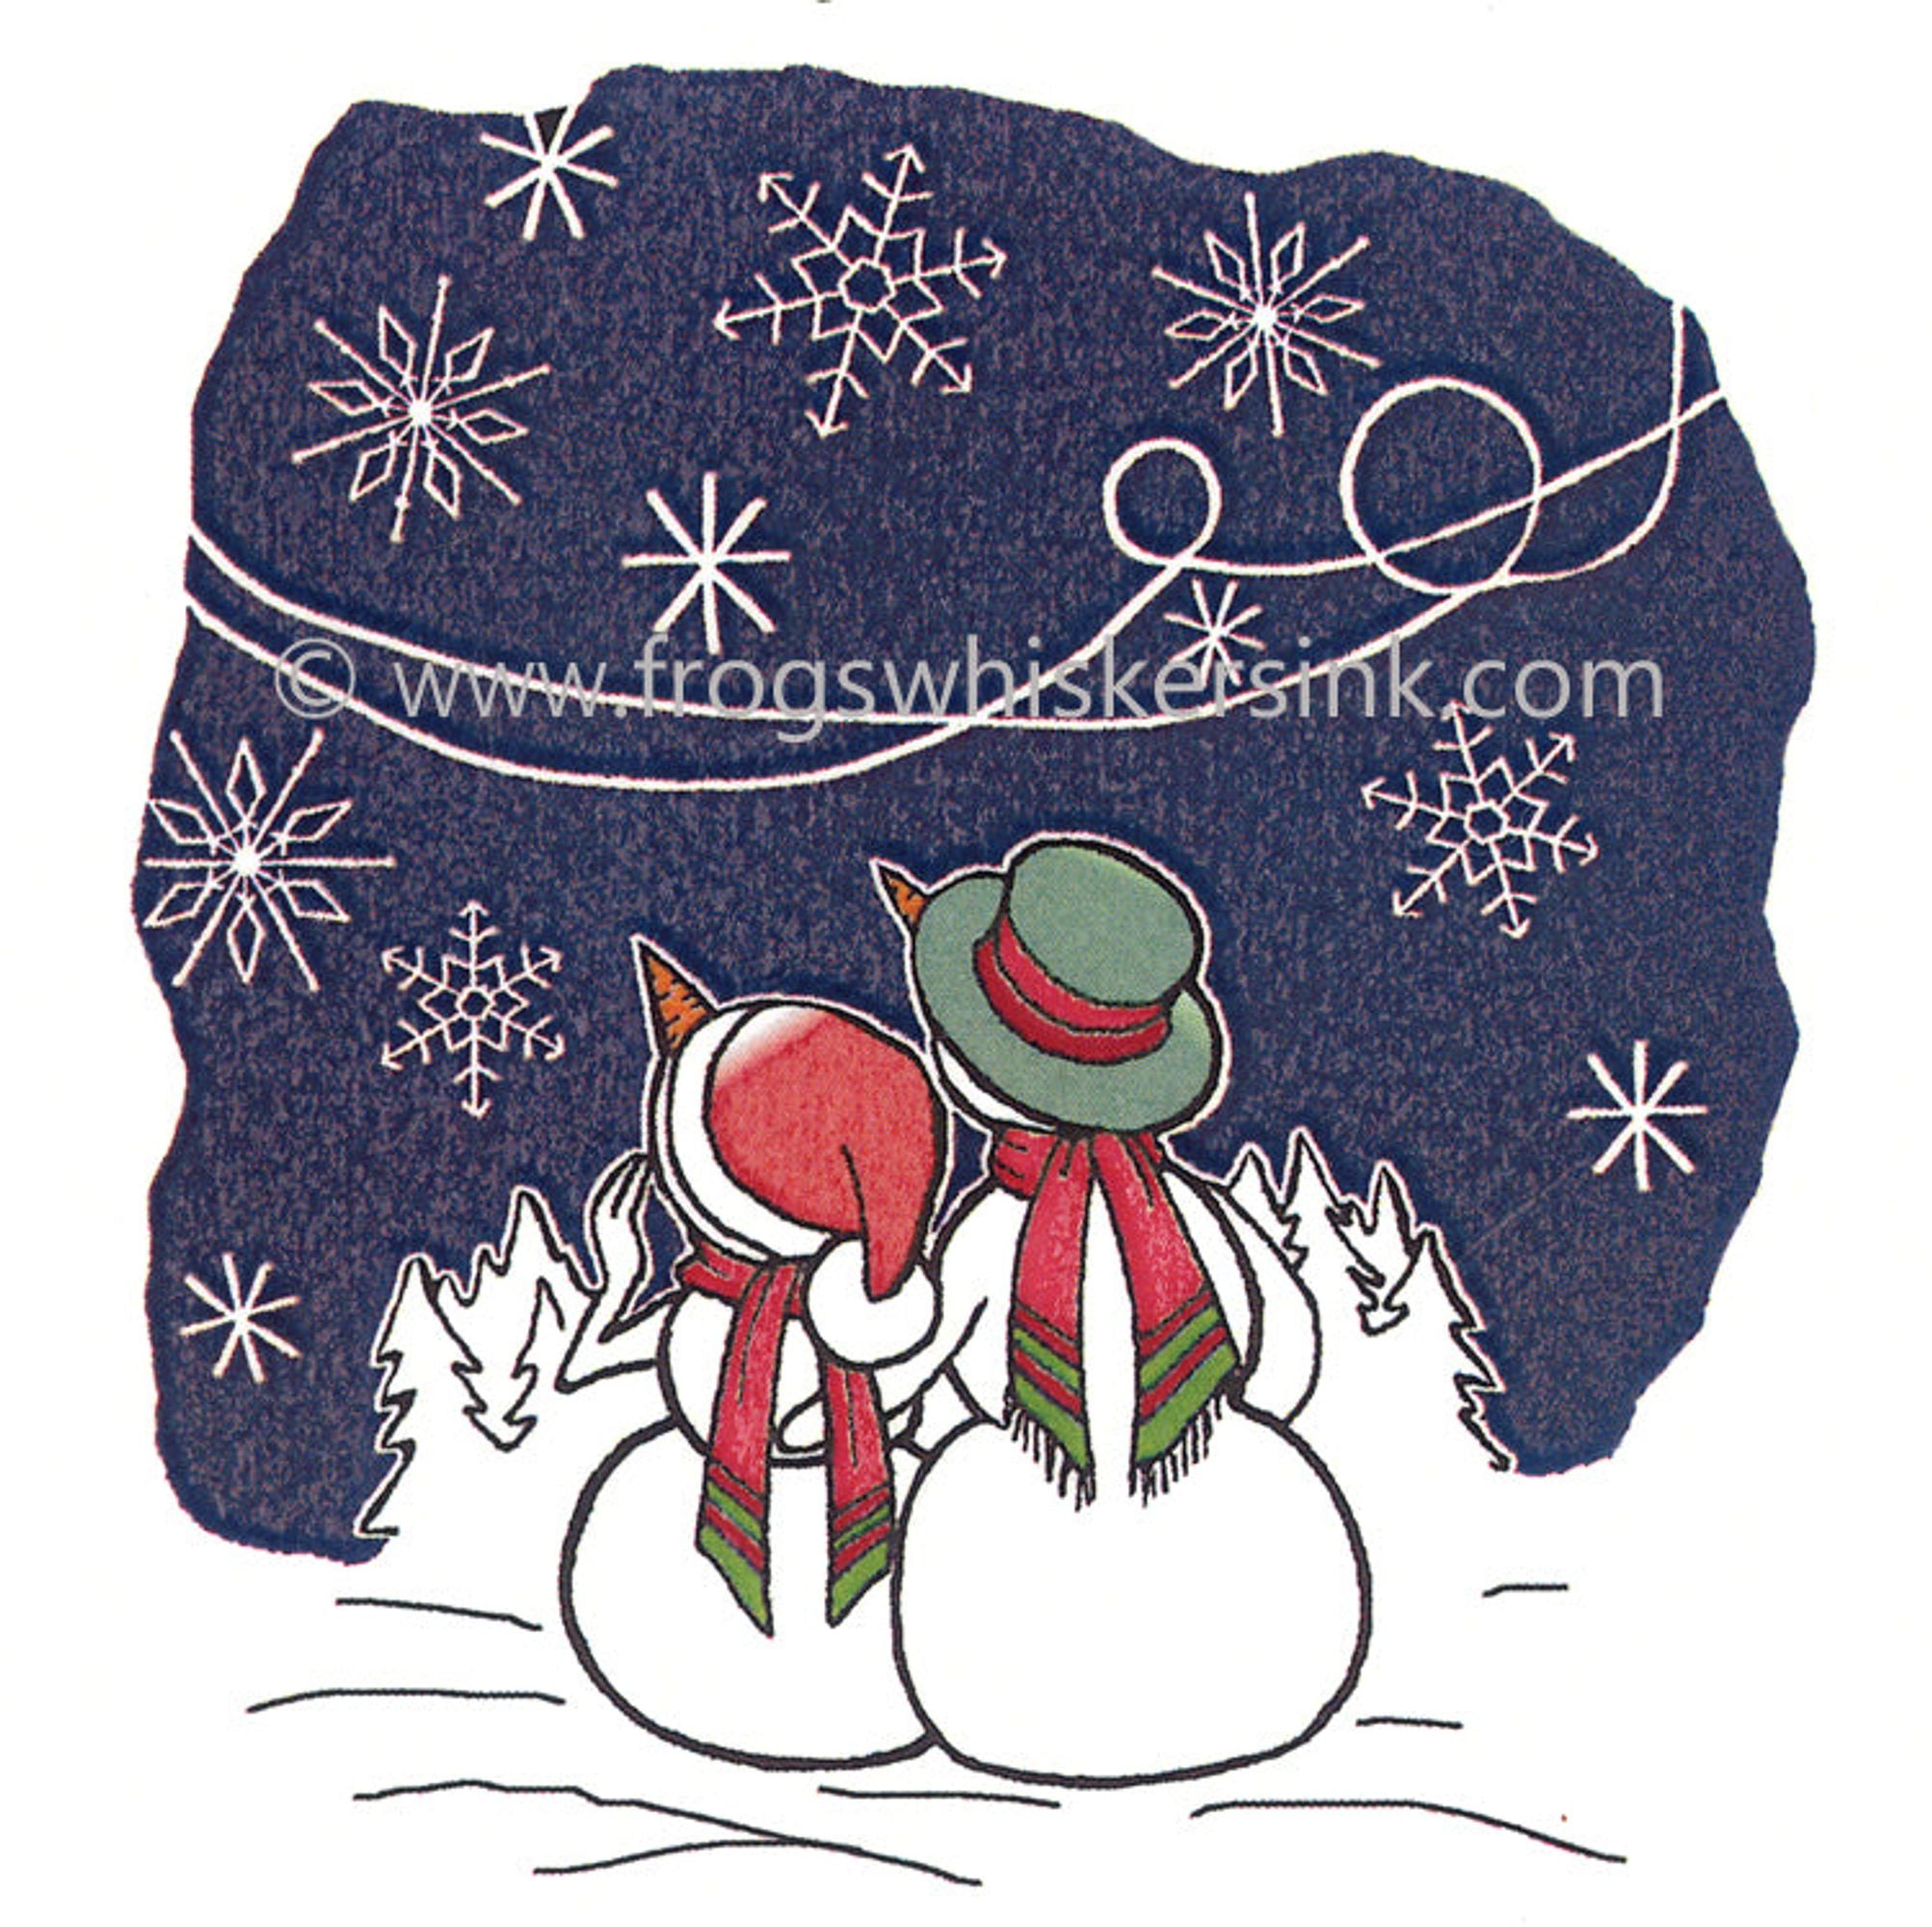 Frog's Whiskers Ink Stamps - Winter Sky